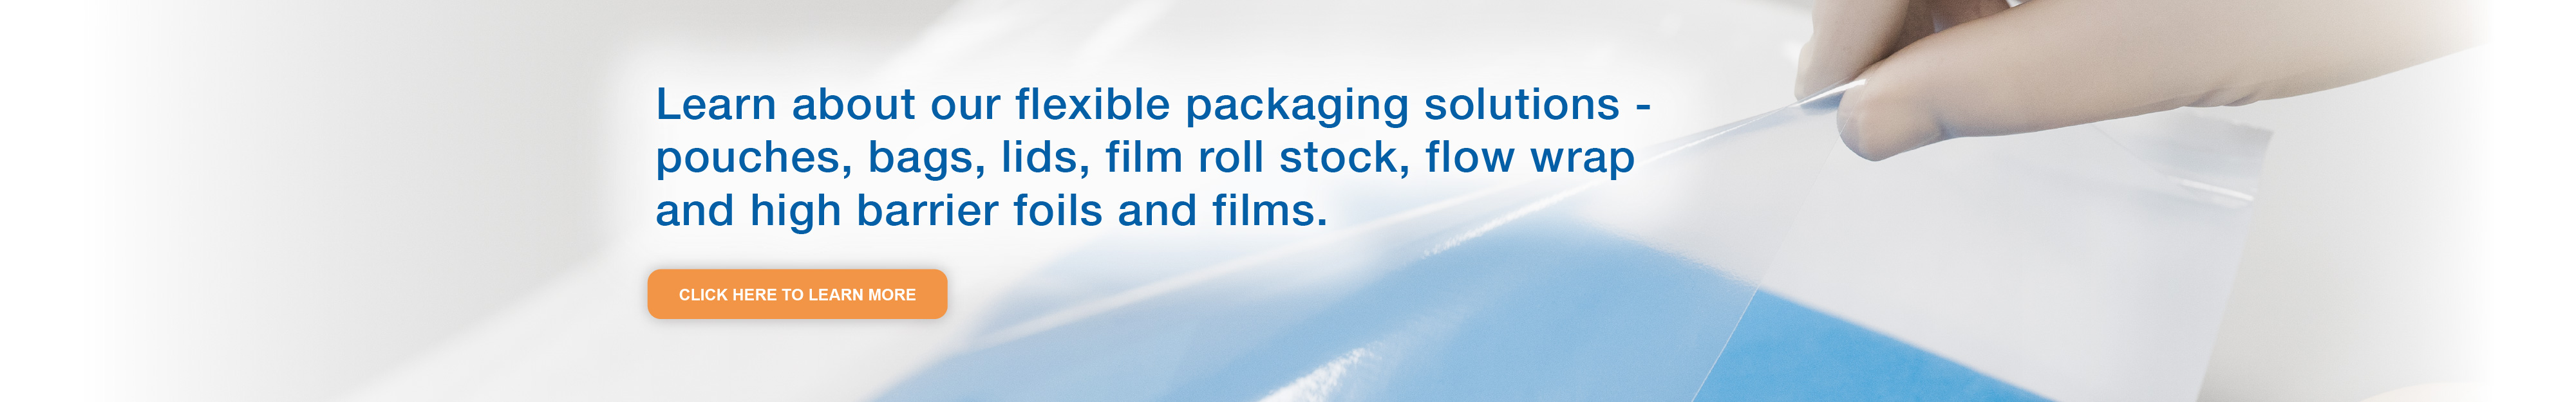 nelipaks-flexible-packaging-solutions-and-products-new